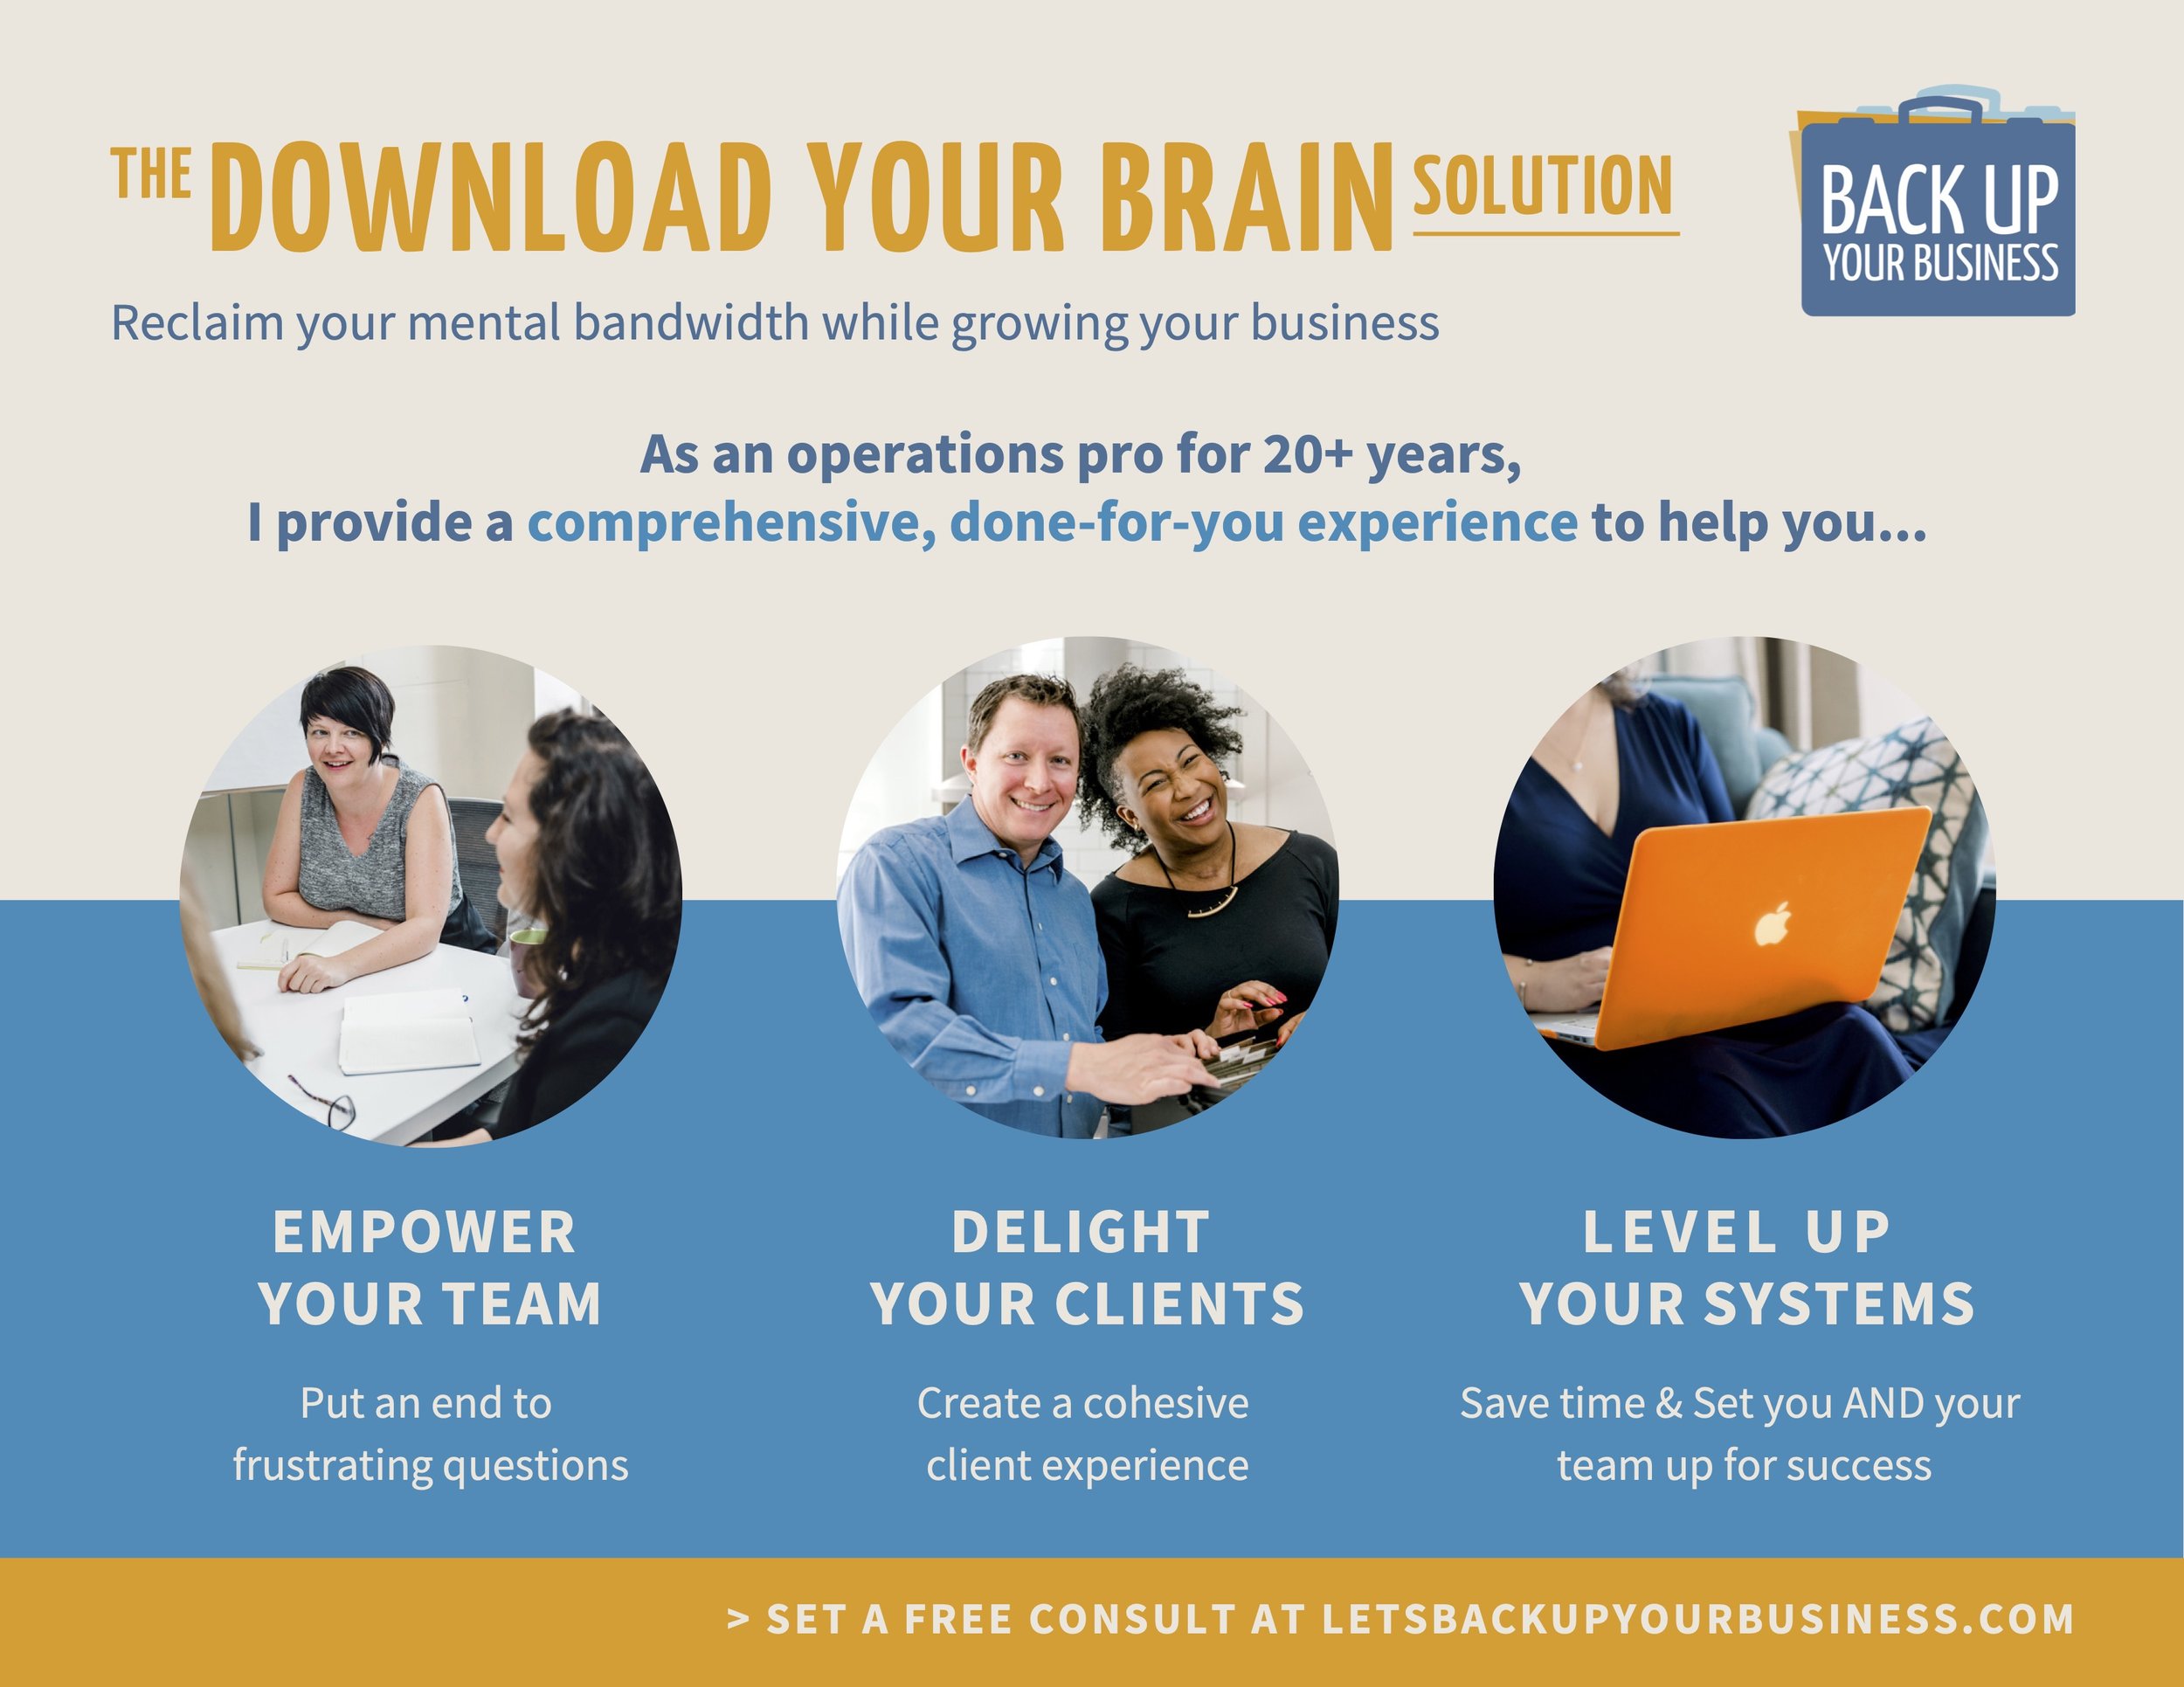 The Download Your Brain Solution